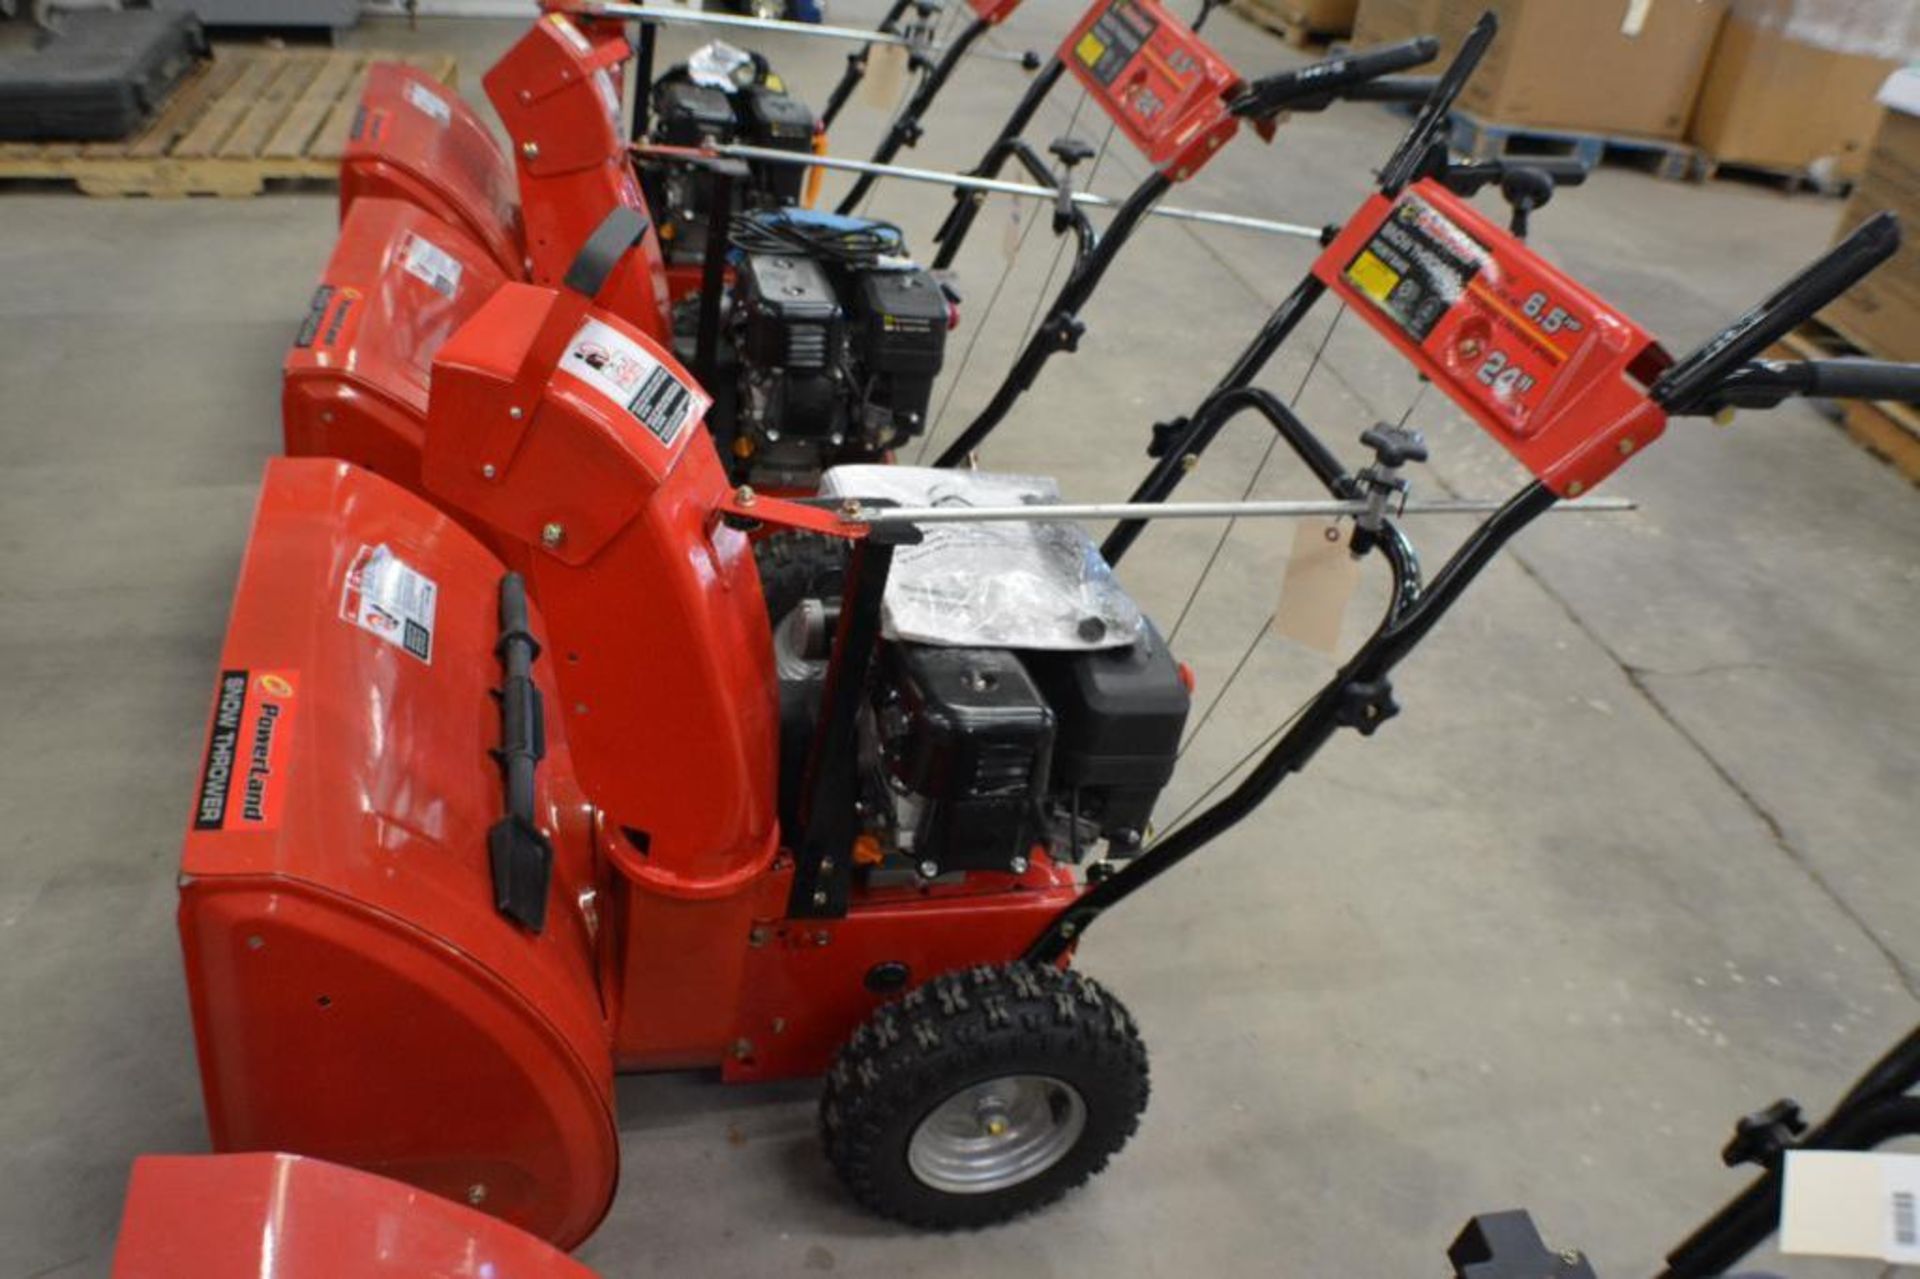 Snow Thrower 24in. 6.5HP with electric Start Engine 4 Stroke by Powerland - Image 5 of 6